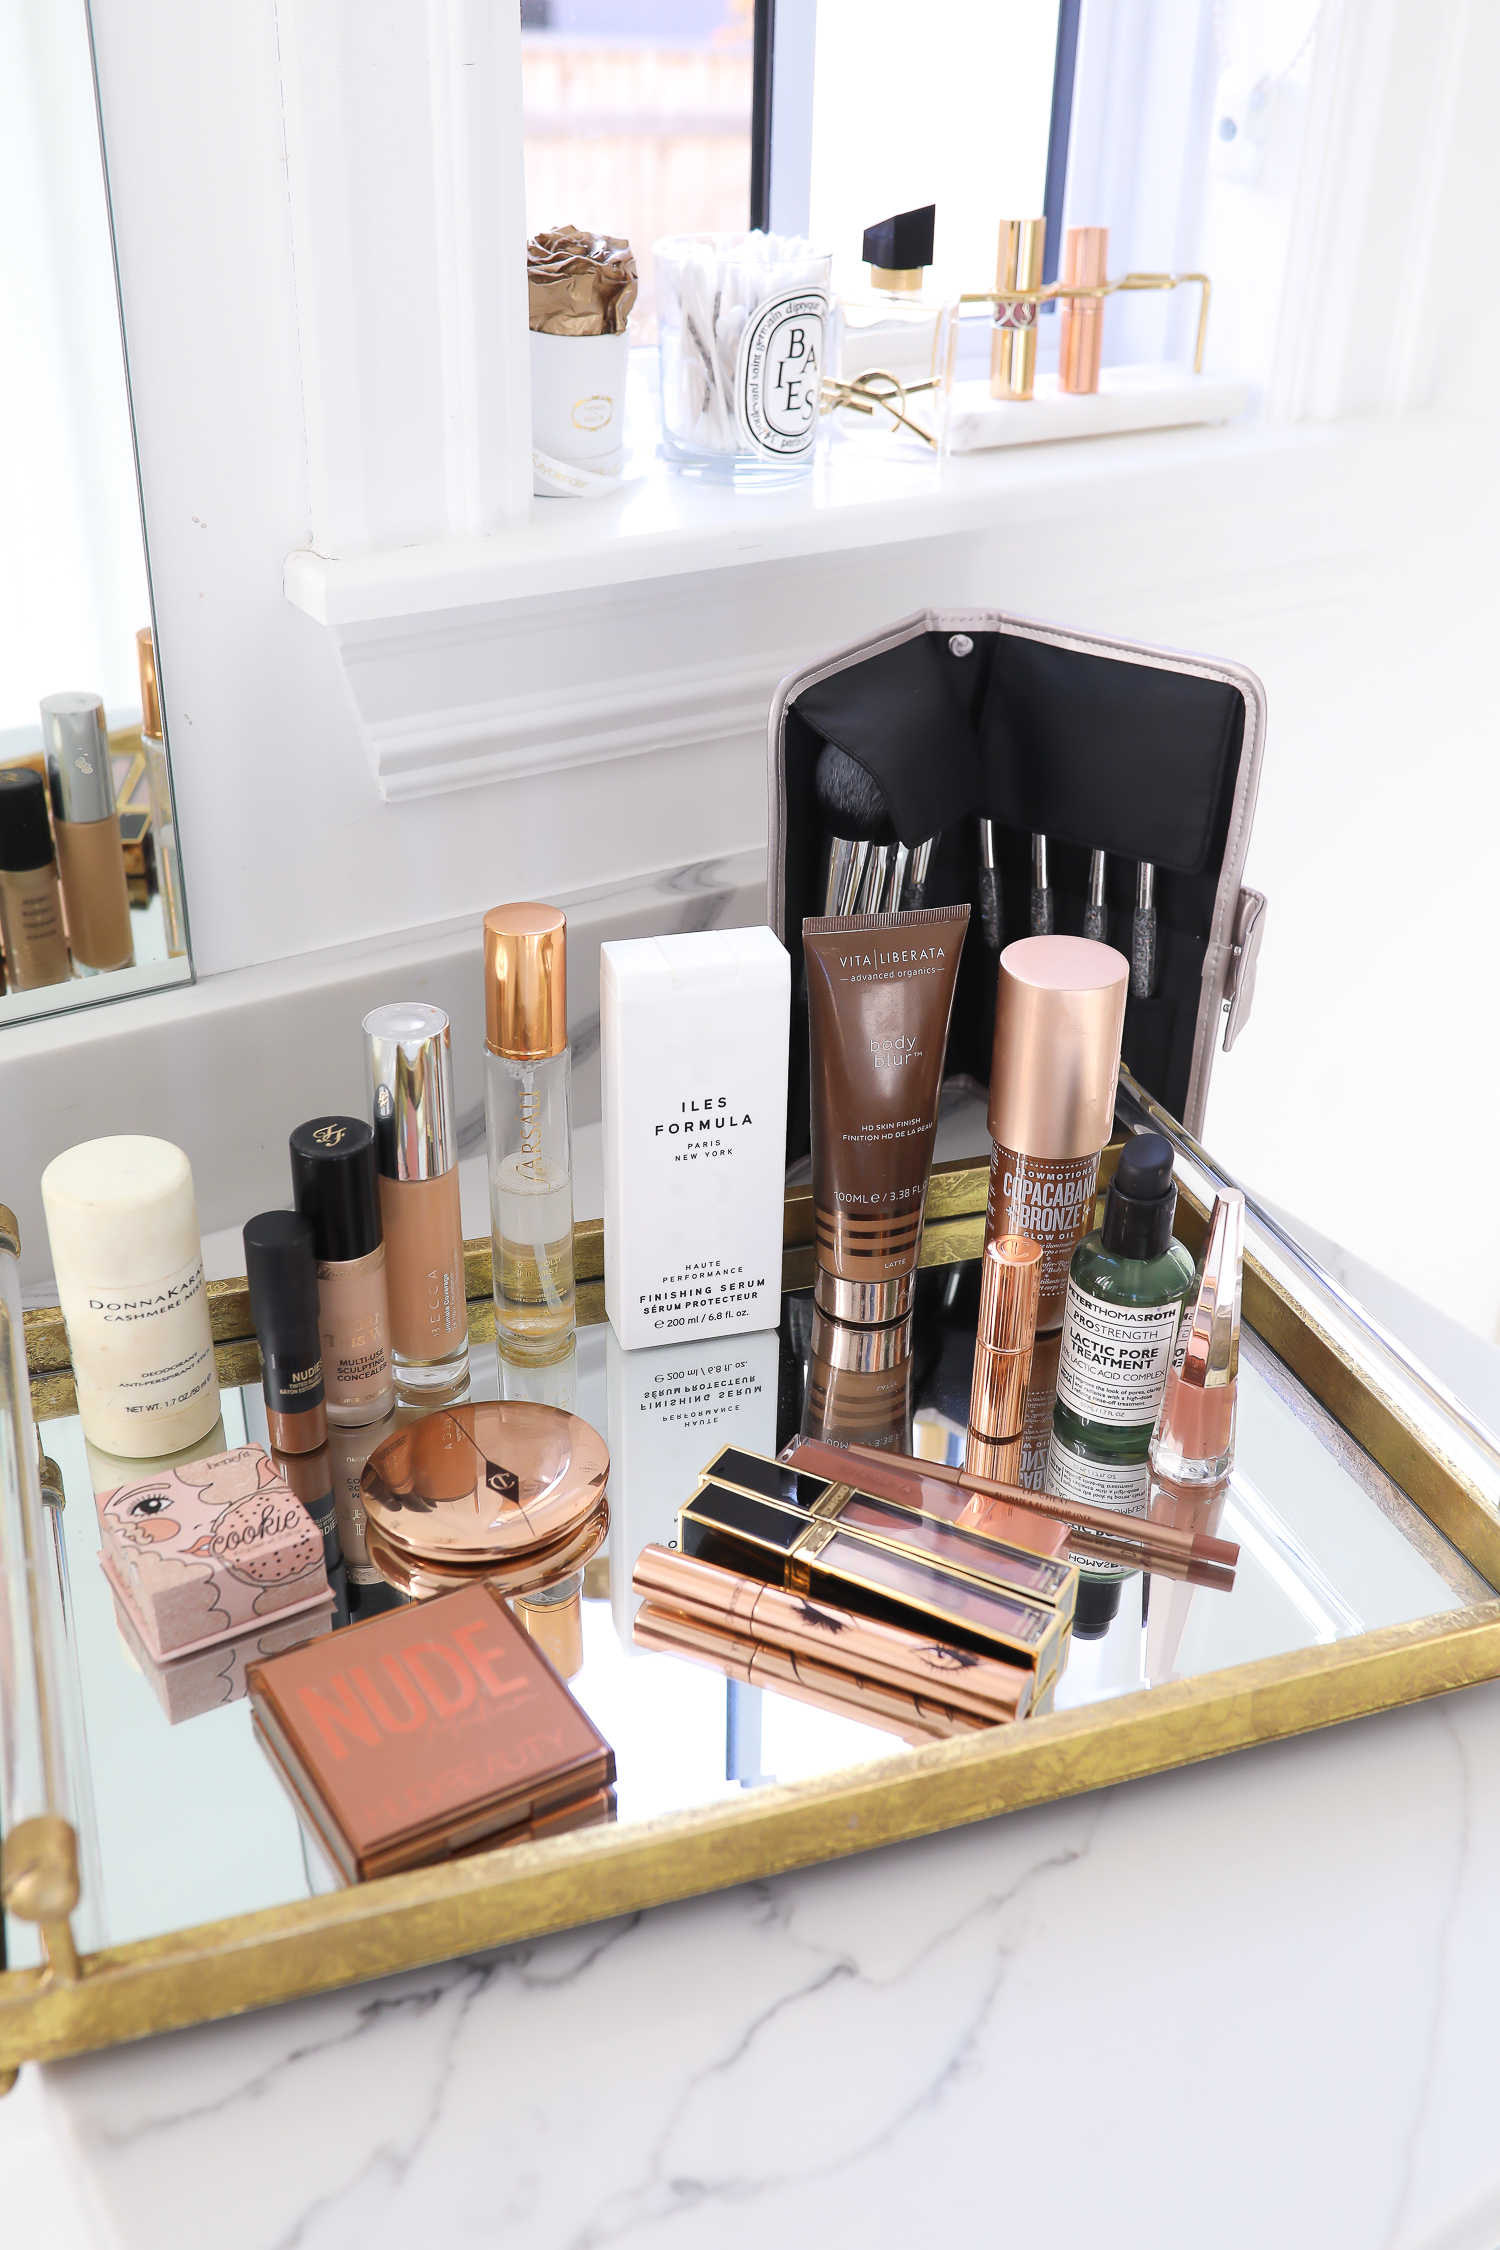  Sephora Holiday Beauty Event favorites featured by top US beauty blog, The Sweetest Thing | Sephora VIB Event november 2019, Sephora Must Haves, Beauty Blogger Sephora Haul, Sequin Wrap dress, SEquin dress 2019, emily ann gemma-2